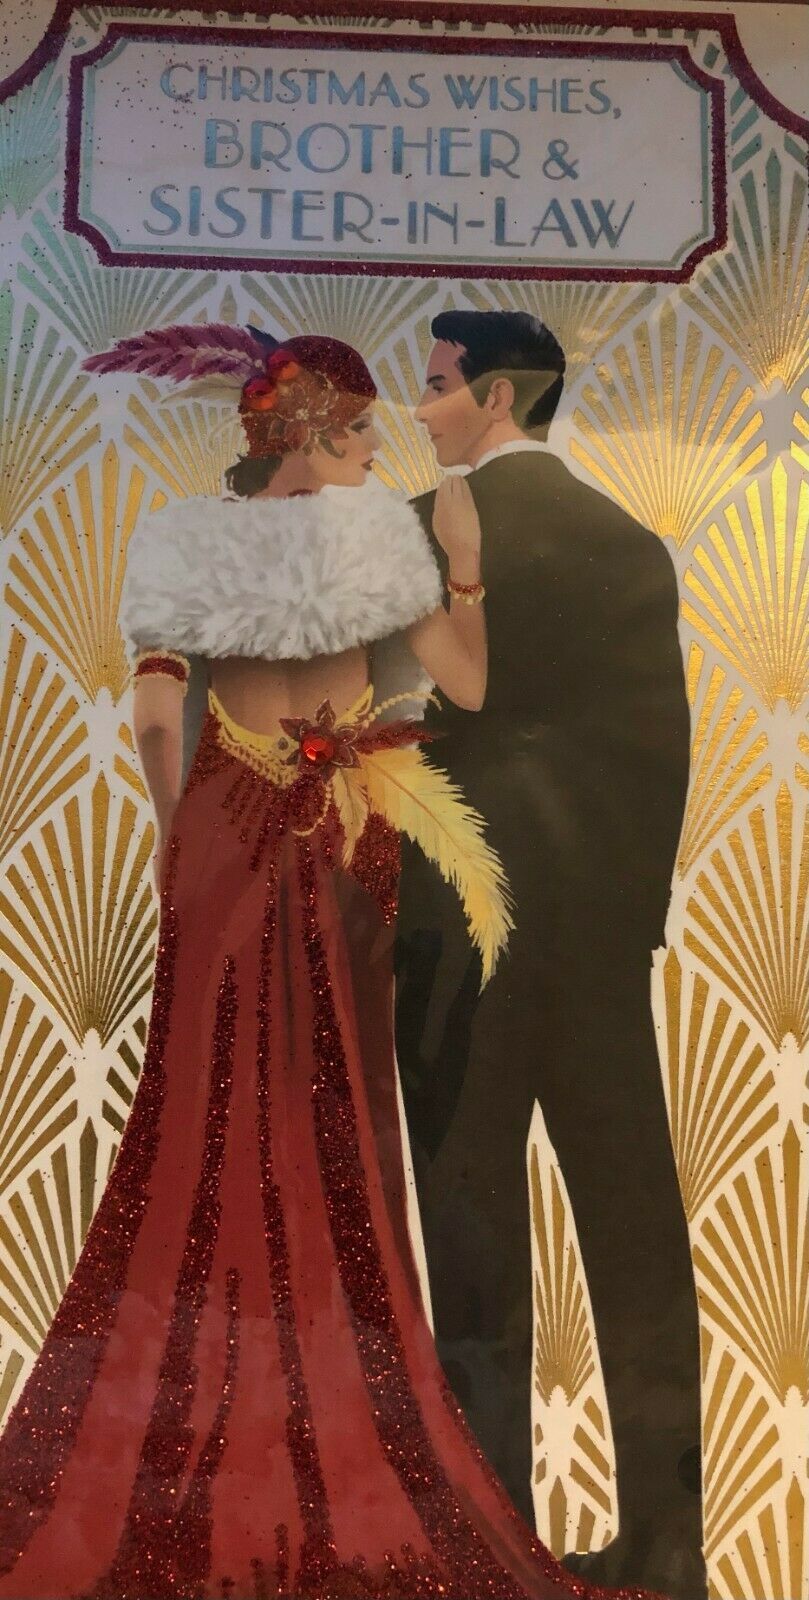 Art Deco Christmas Card - Christmas Wishes, Brother and Sister In law